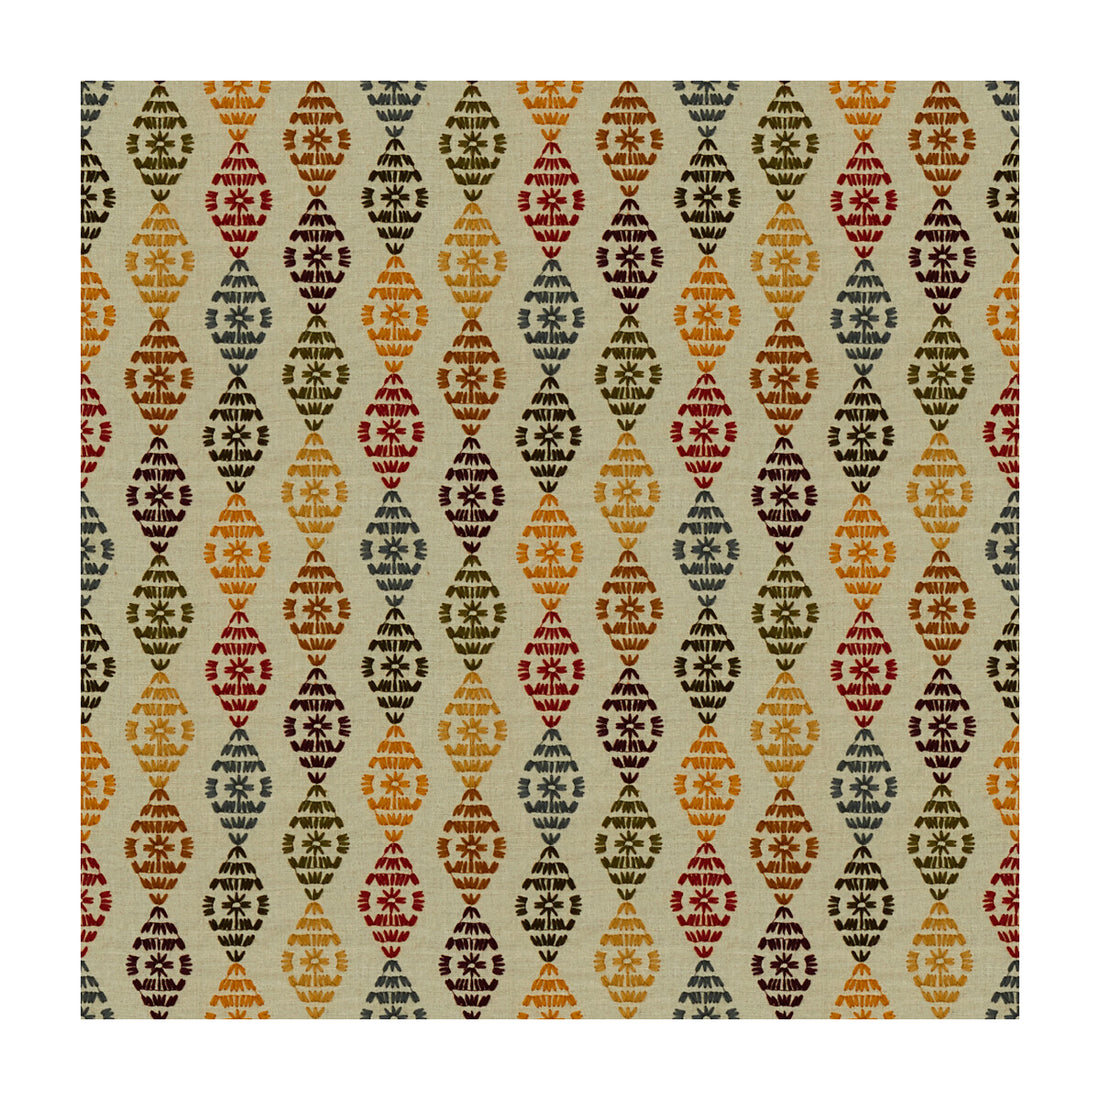 Soojini Knots fabric in harvest color - pattern 4012.416.0 - by Kravet Design in the Museum Of New Mexico collection